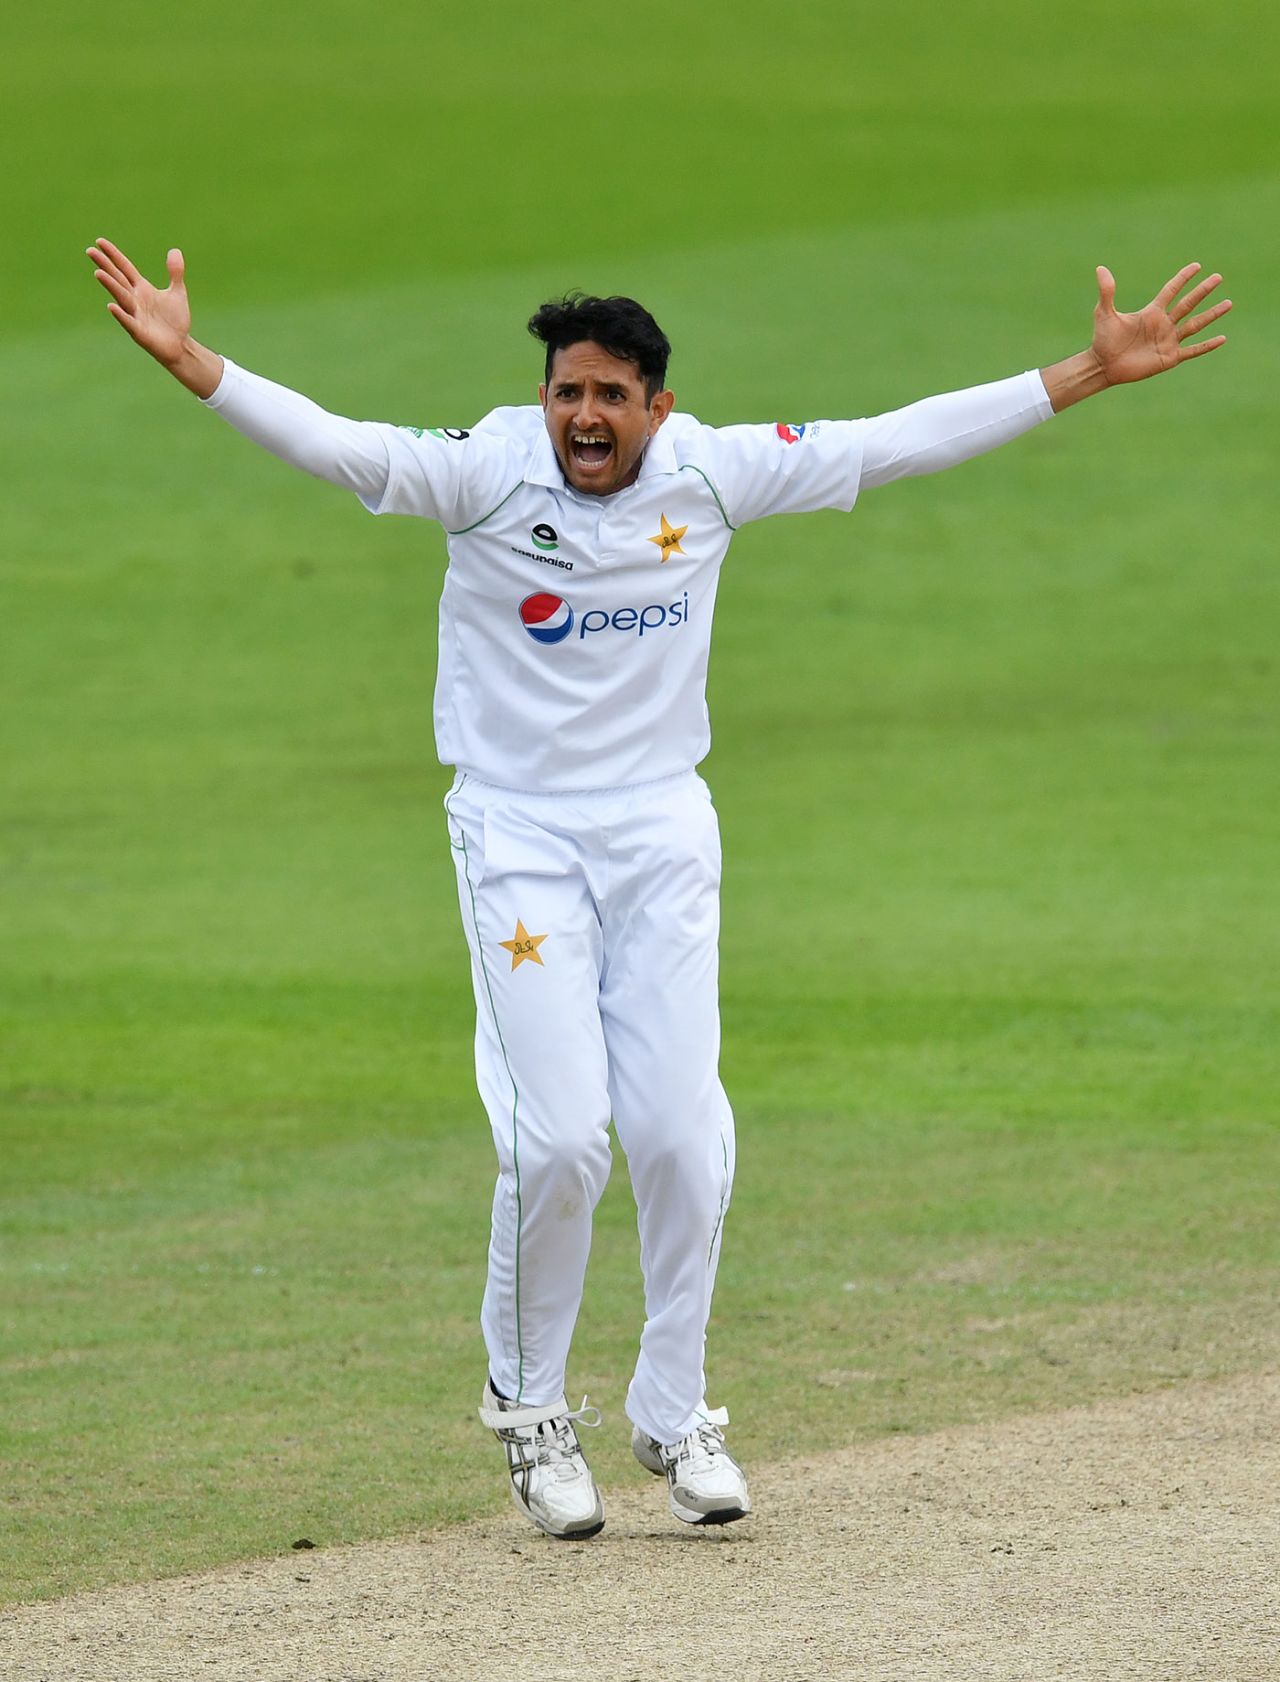 Mohammad Abbas appeals for the lbw of Dom Sibley, England v Pakistan, 1st Test, Old Trafford, 2nd day, August 6, 2020